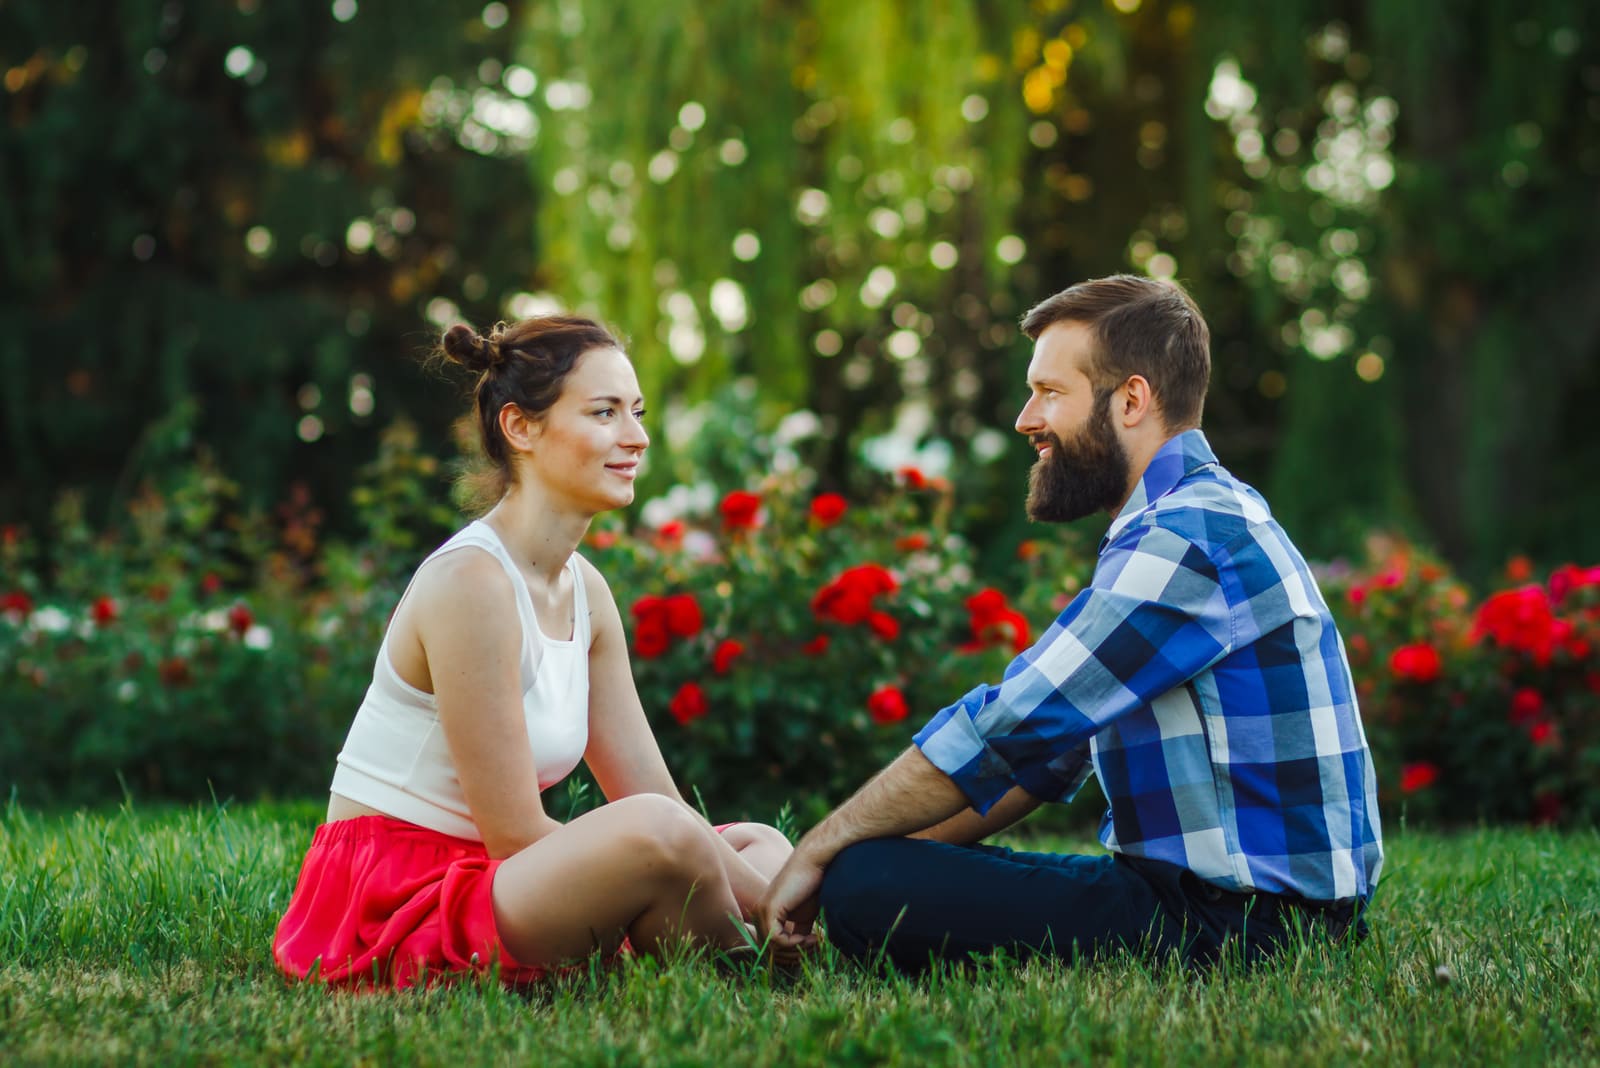 couple talking together outdoor - sitting on grass